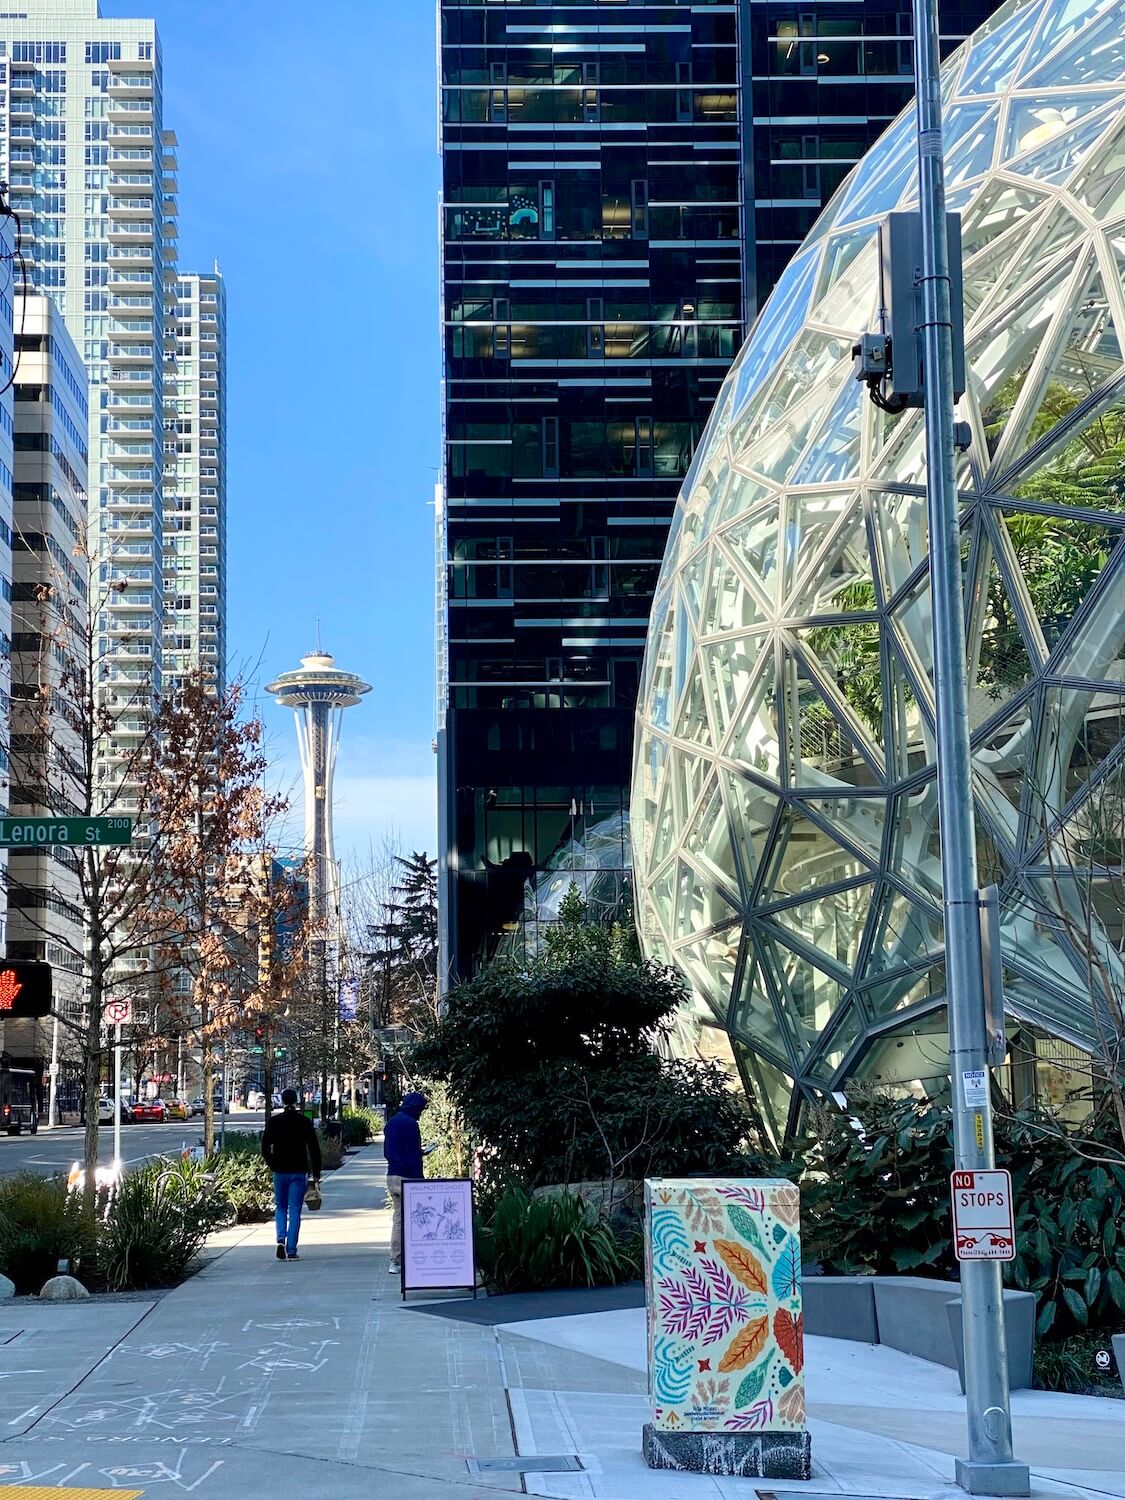 The Space Needle rises in the background of this shot taken near the Amazon Spheres in Downtown Seattle.  The modern buildings are a fun thing to explore when outdoors in the Spring. 